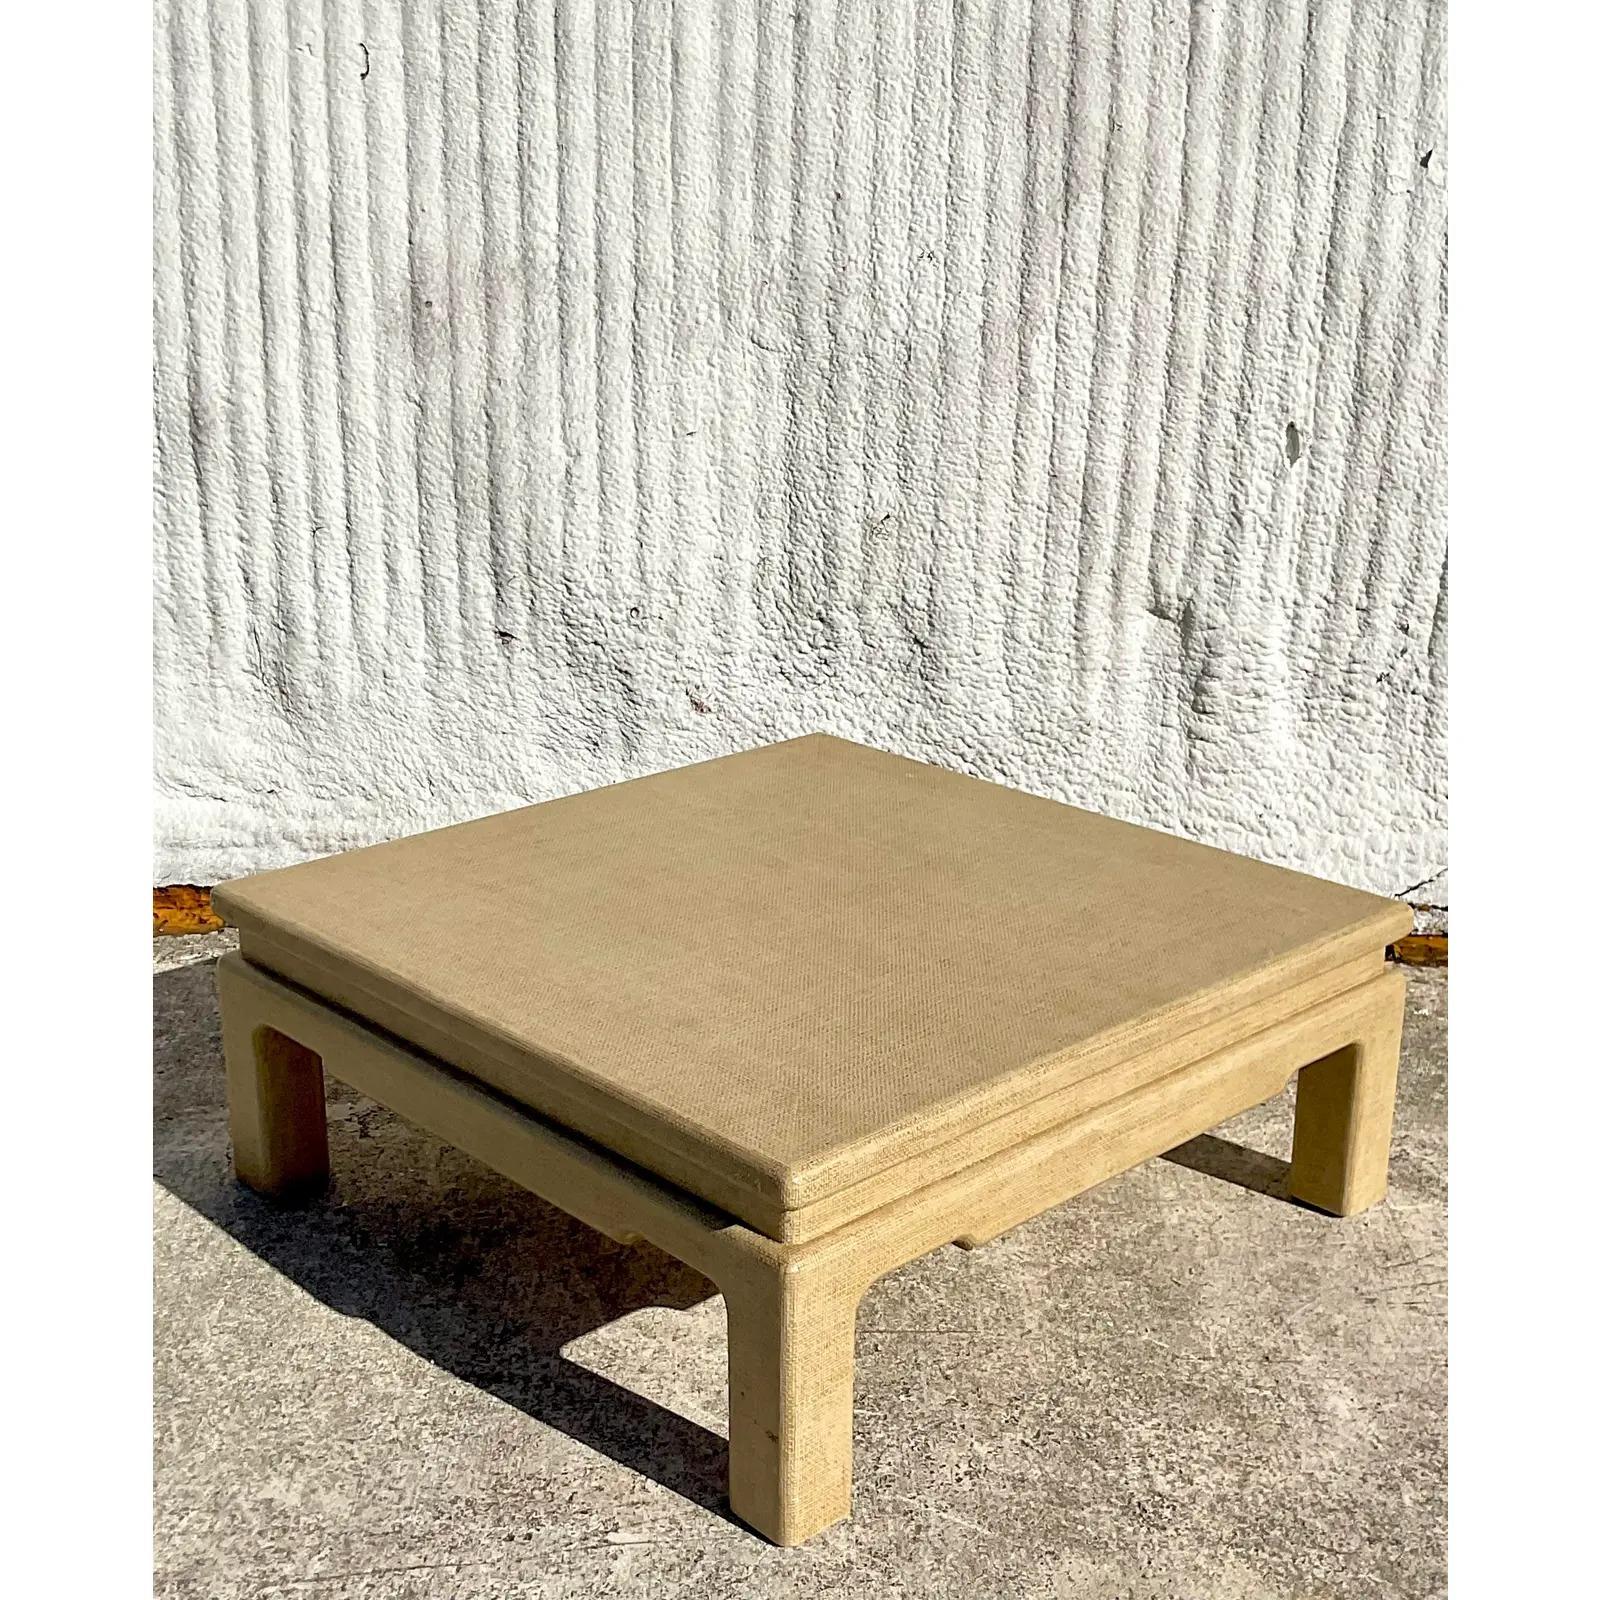 A fantastic vintage Coastal coffee table. A custom built beauty with a chic Grasscloth finish. Notched Parsons shape in a pale gold color. Perfect as is or paint to coordinate with your room. Acquired from a Palm Beach estate.